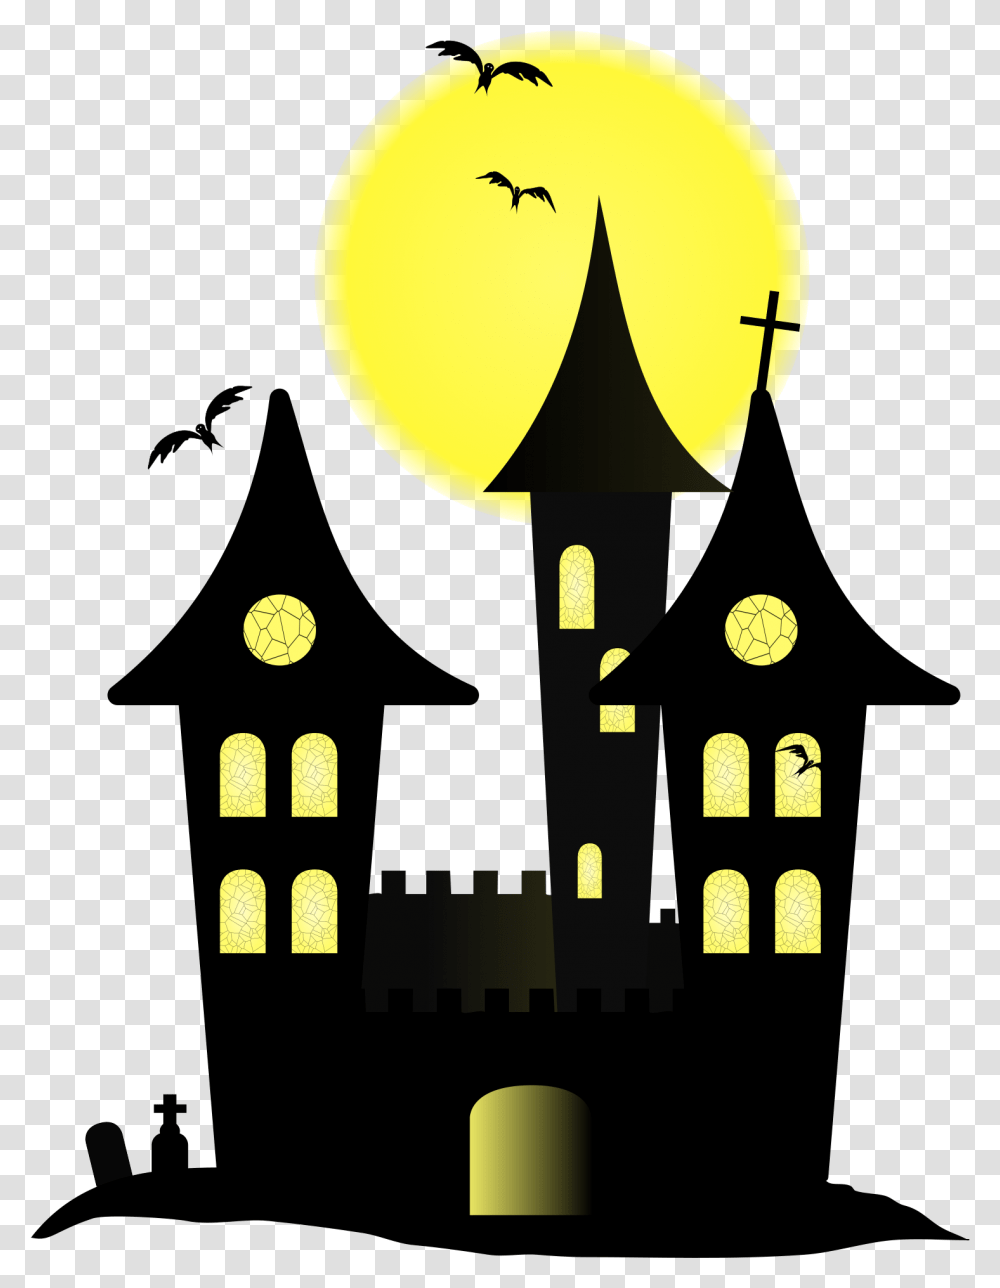 Library Of Halloween Castle Clip Art Stock Design Haunted House Cartoon, Lighting, Treasure, Coin, Architecture Transparent Png